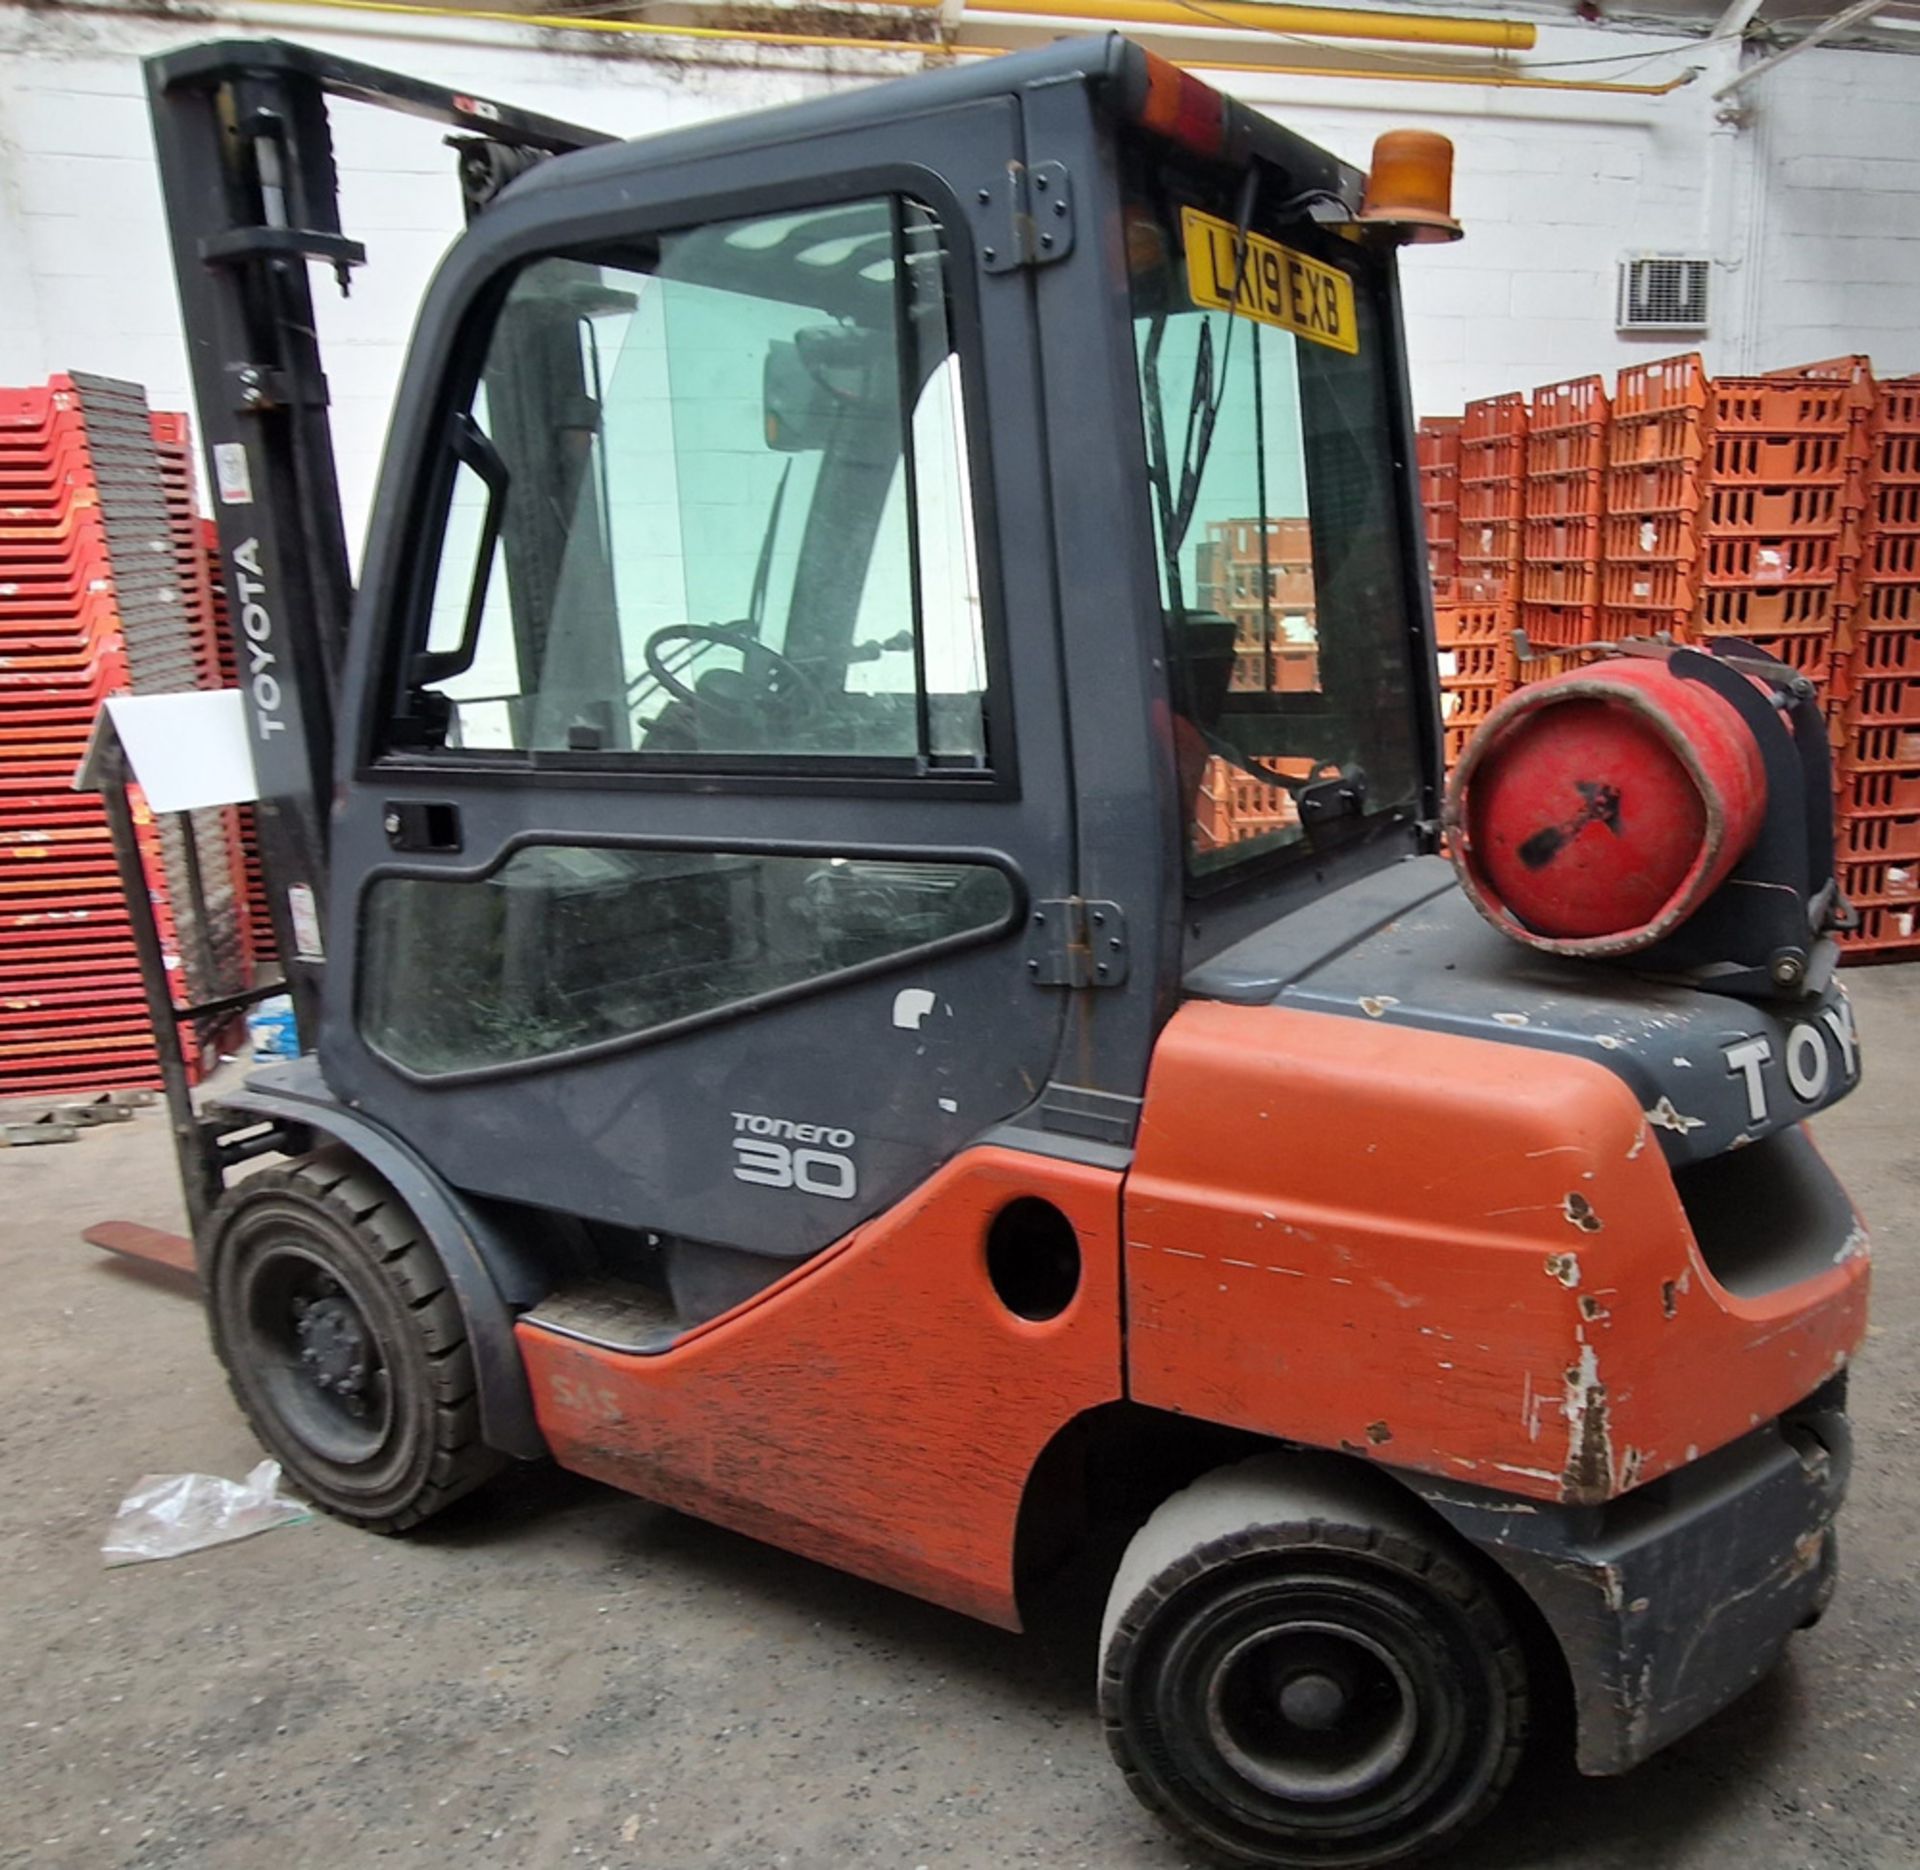 A TOYOTA Tonero 30 3000Kg capacity LPG Powered Ride-On Counter-Balance Forklift Truck, Serial No. - Image 3 of 6